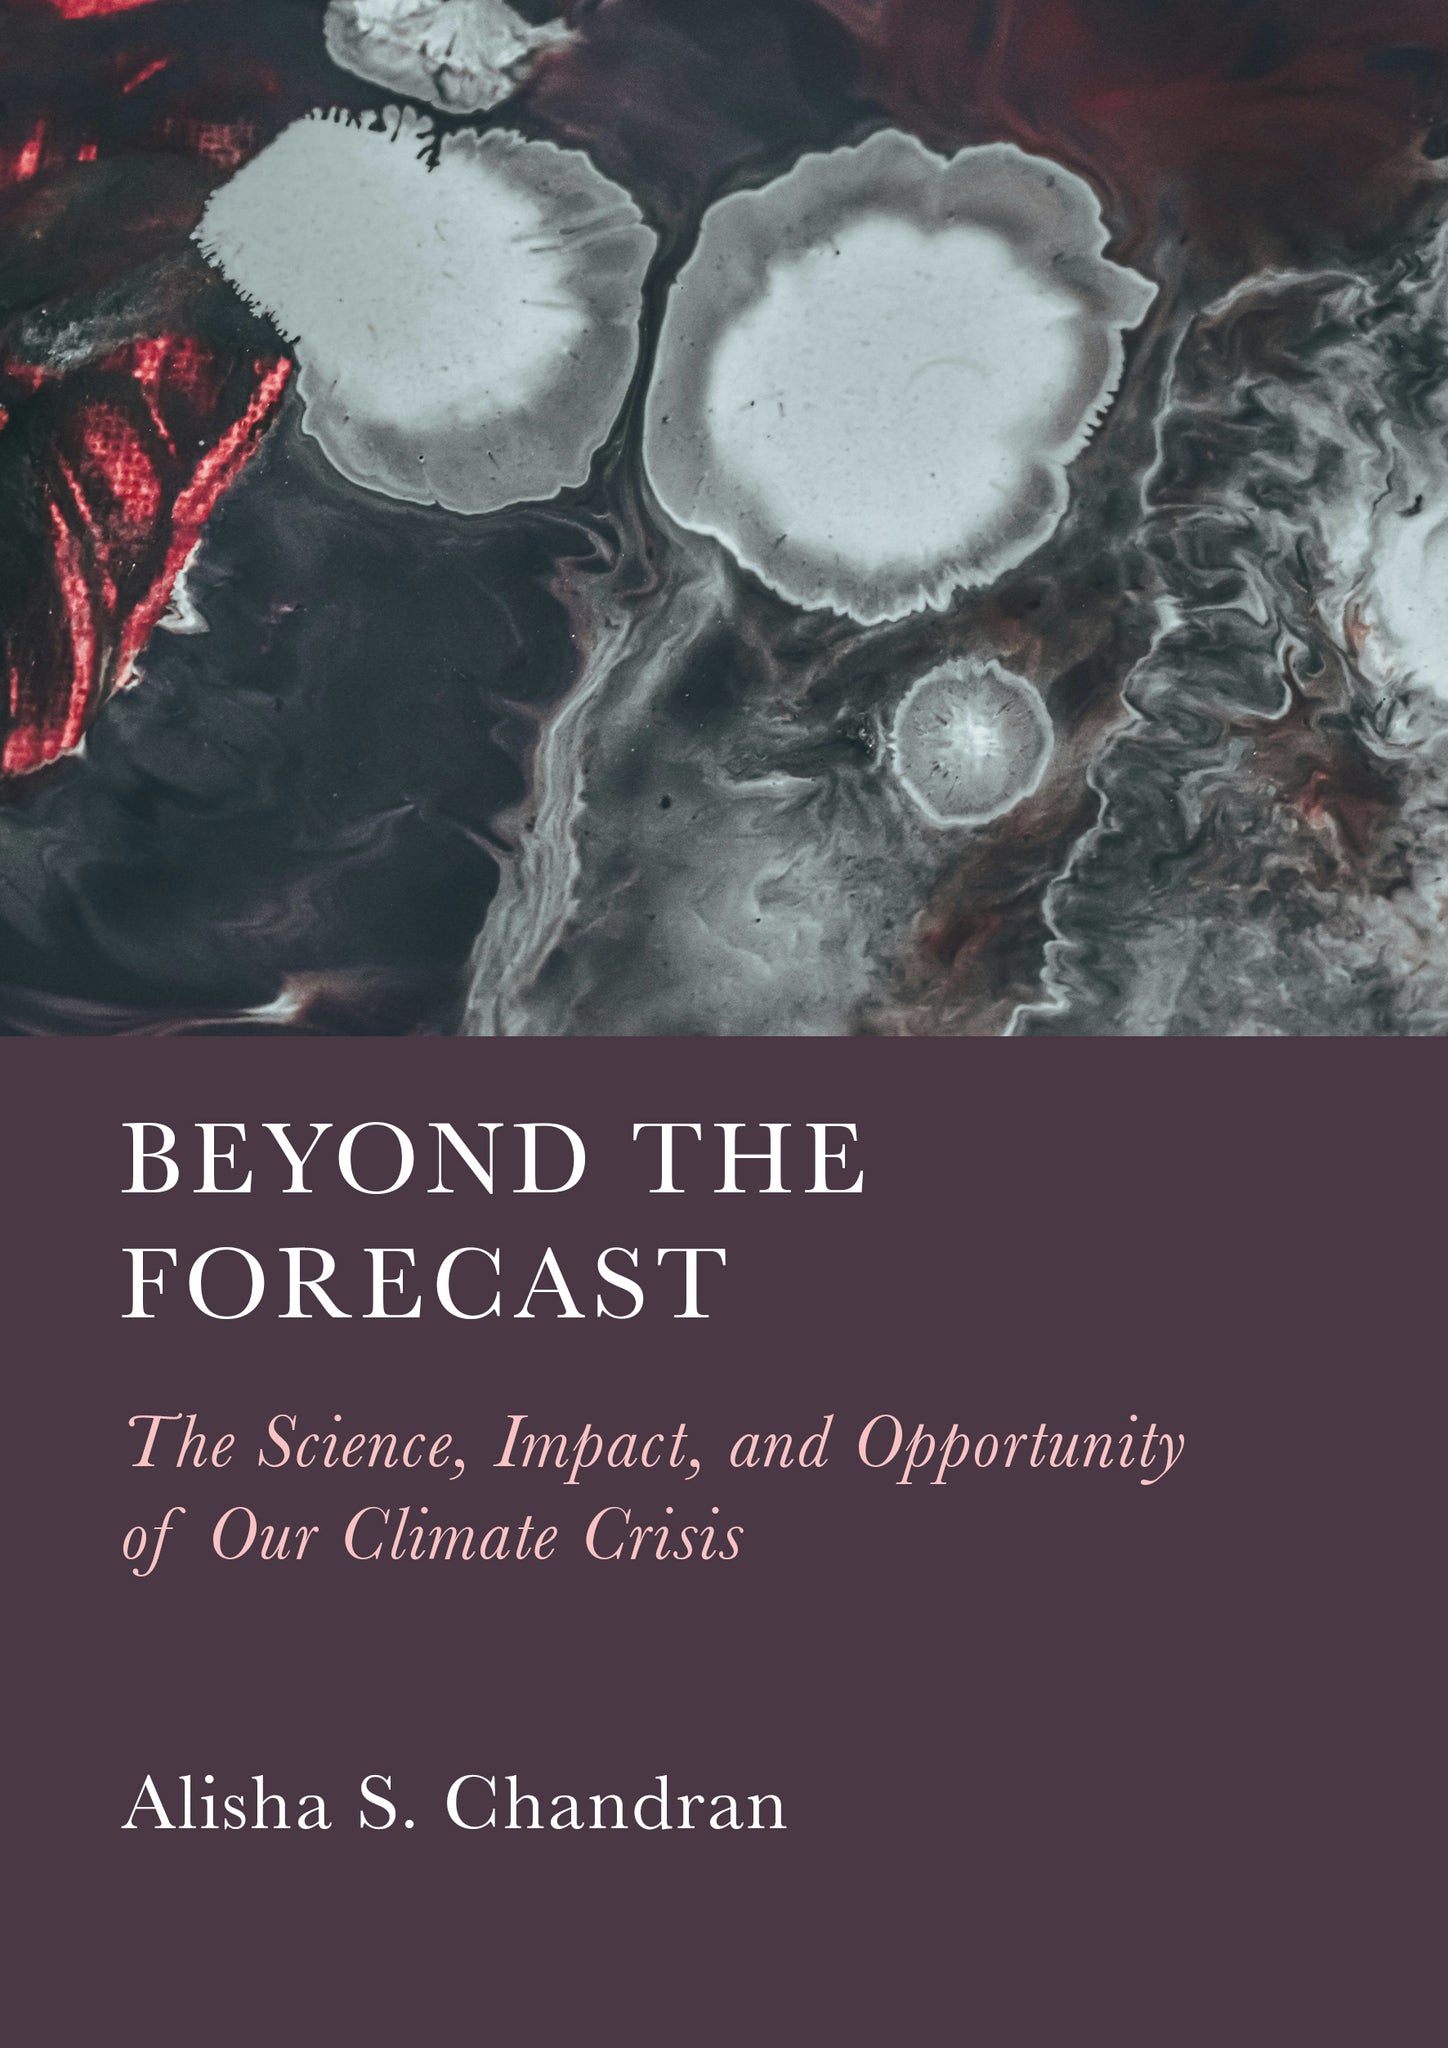 Beyond the Forecast: The Science, Impact, and Opportunity of Our Climate Crisis